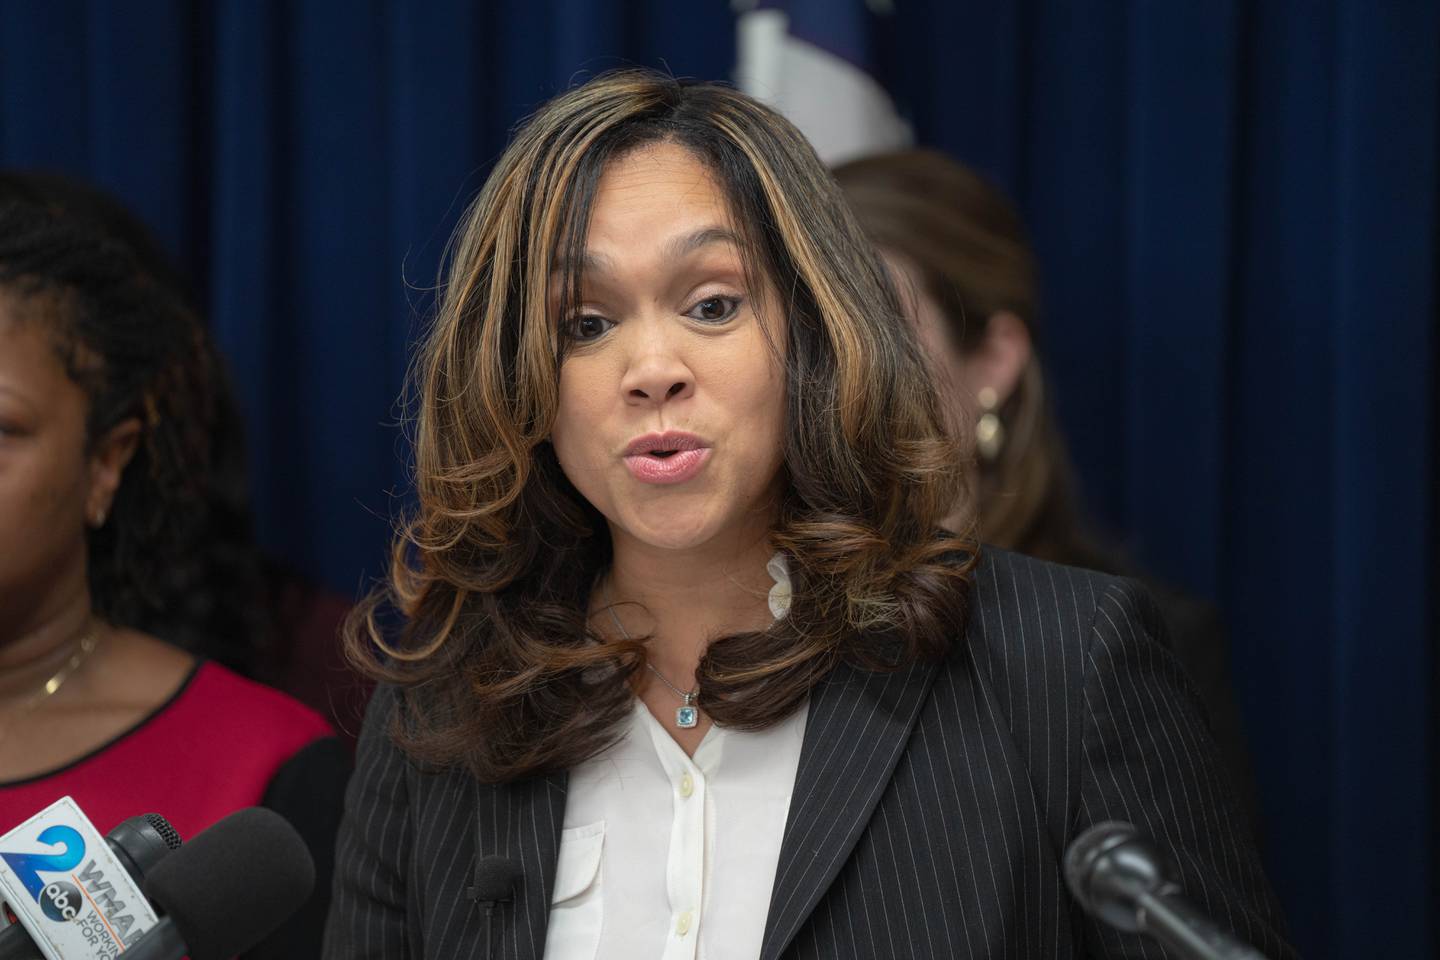 Marilyn Mosby speaks at the Baltimore City State's Attorney Press Conference April 6, 2022 at the Baltimore City State's Attorney Office.